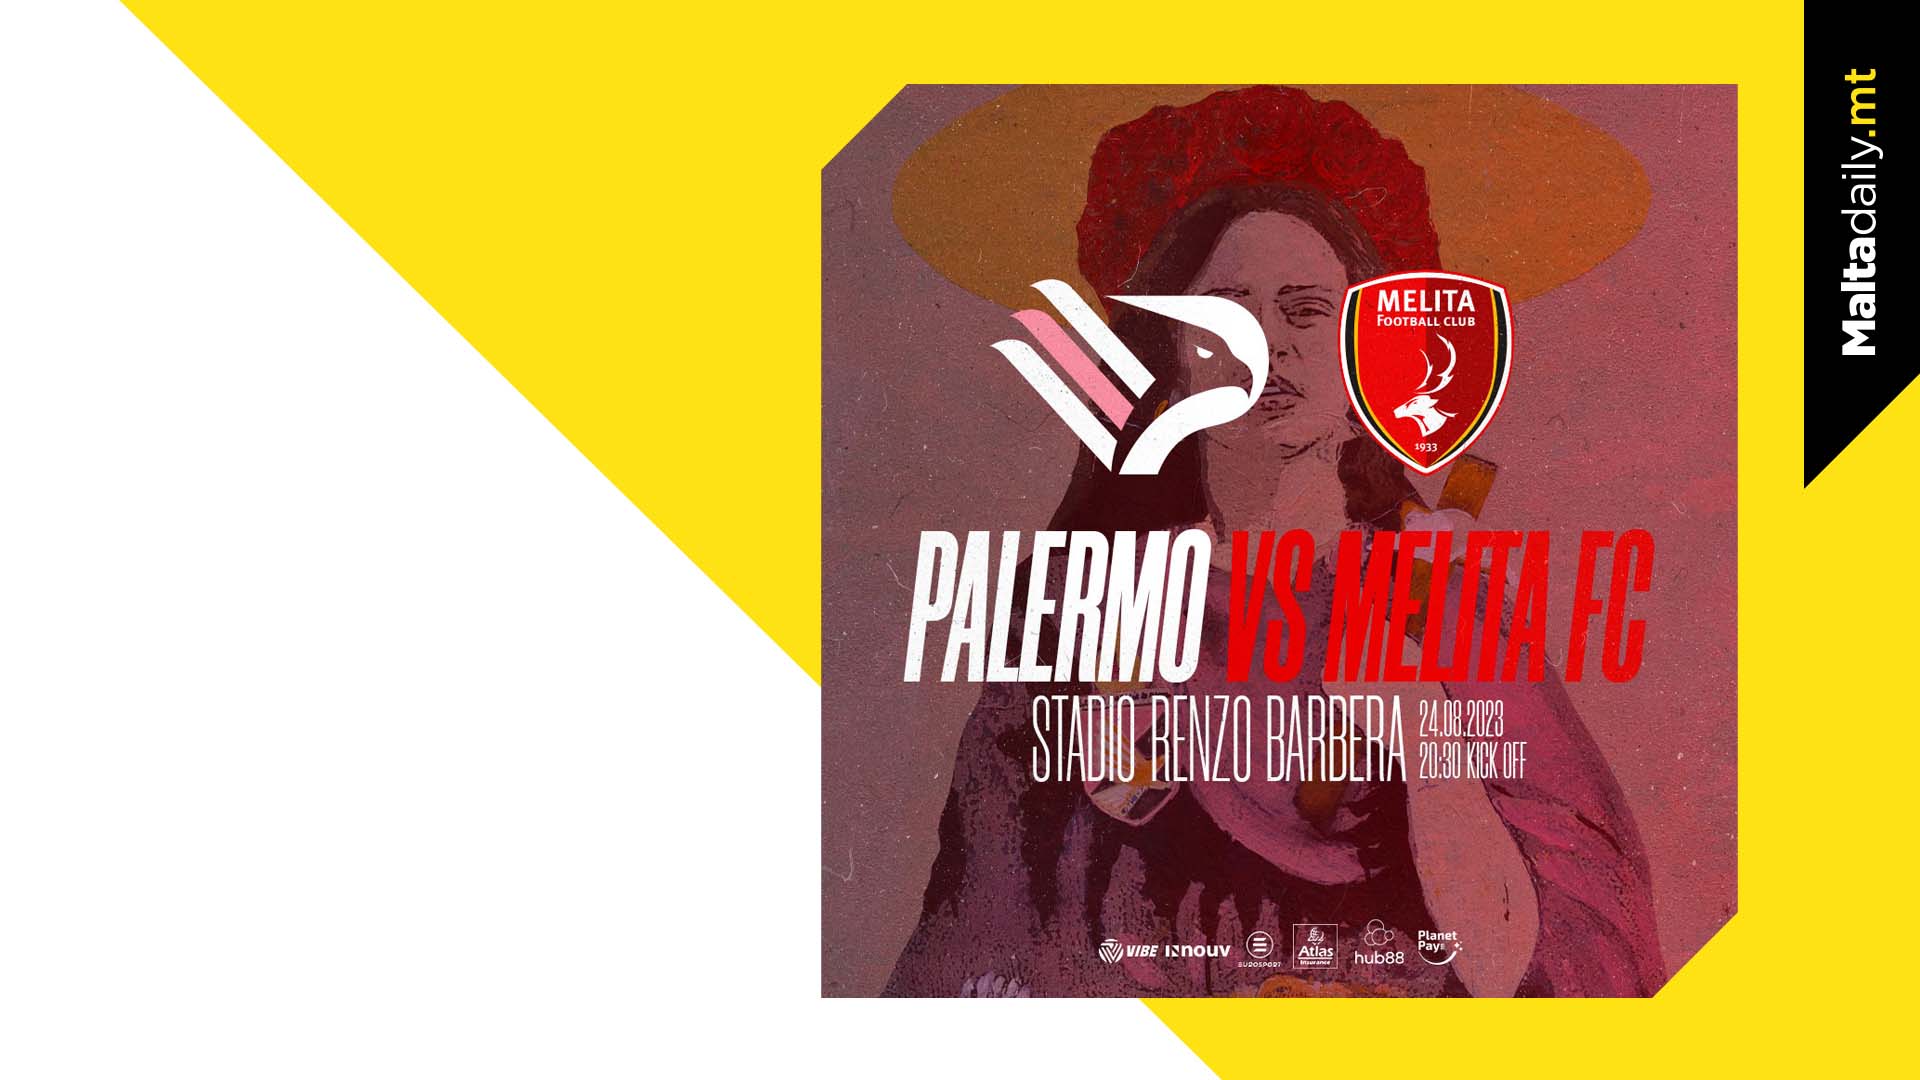 Melita FC To Face Off Palermo In Friendly Match This August